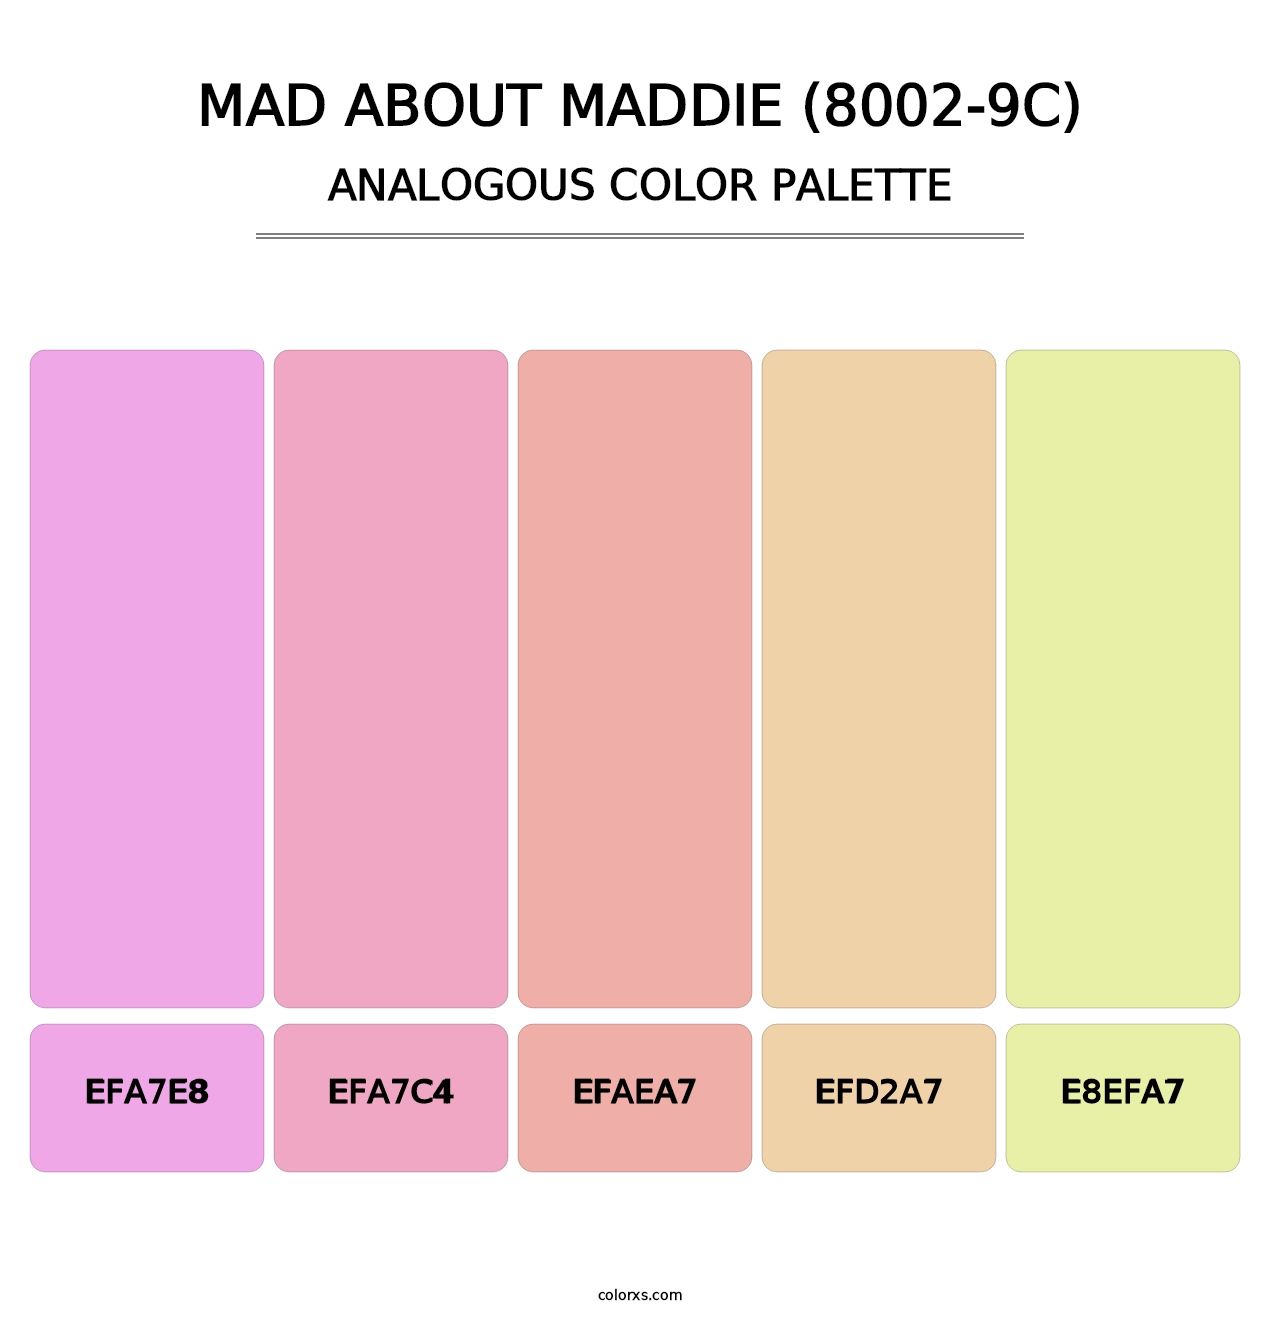 Mad About Maddie (8002-9C) - Analogous Color Palette